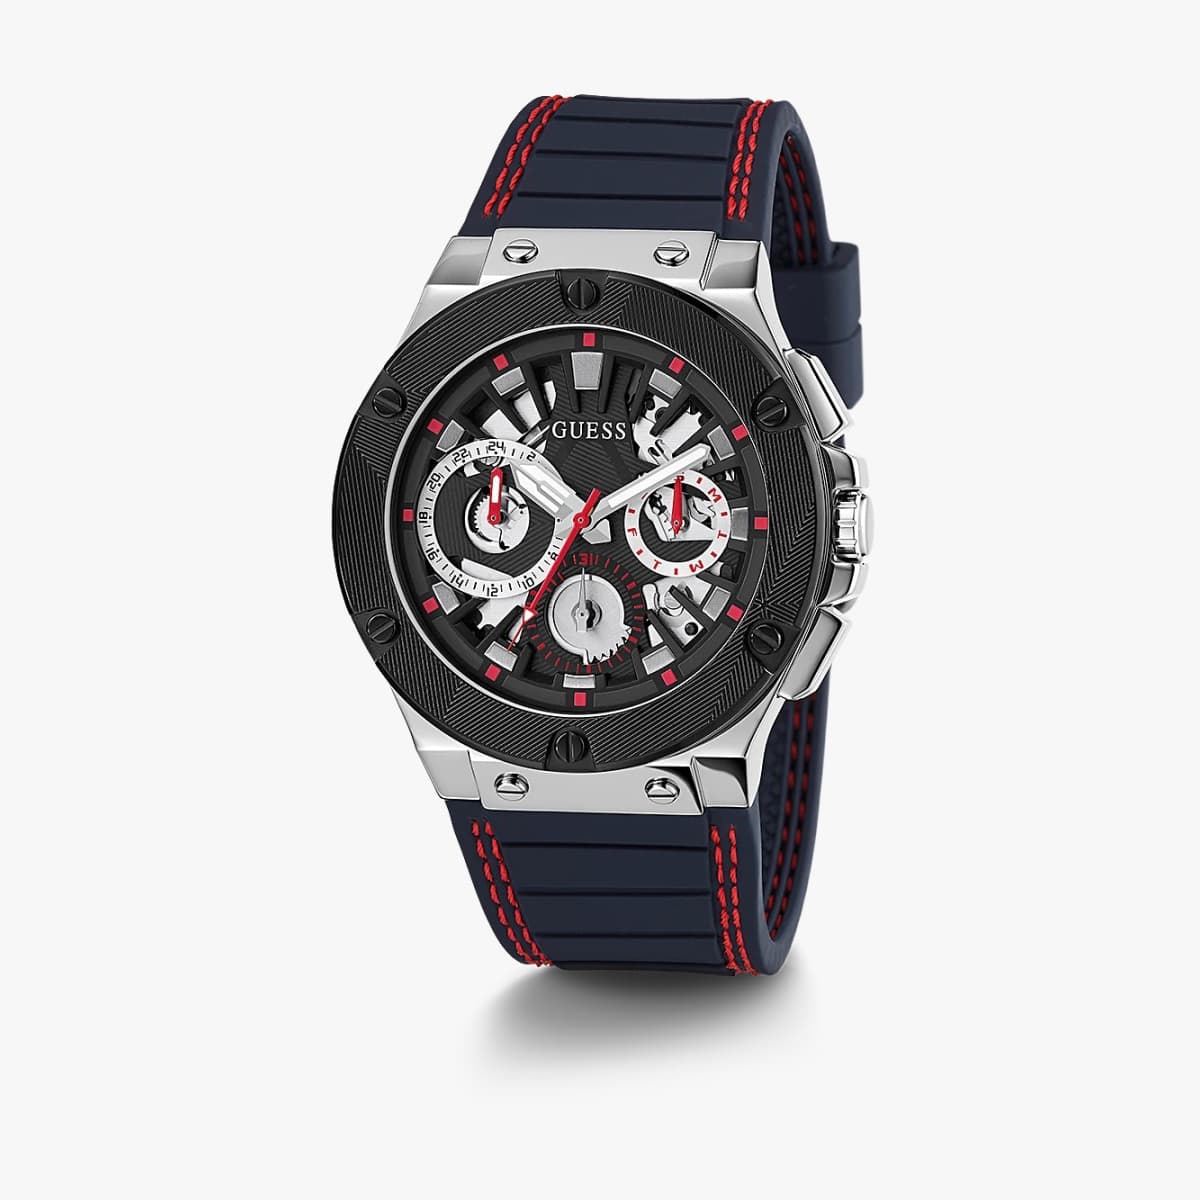 MONTRE GUESS HOMME M.FONCTION SILICONE